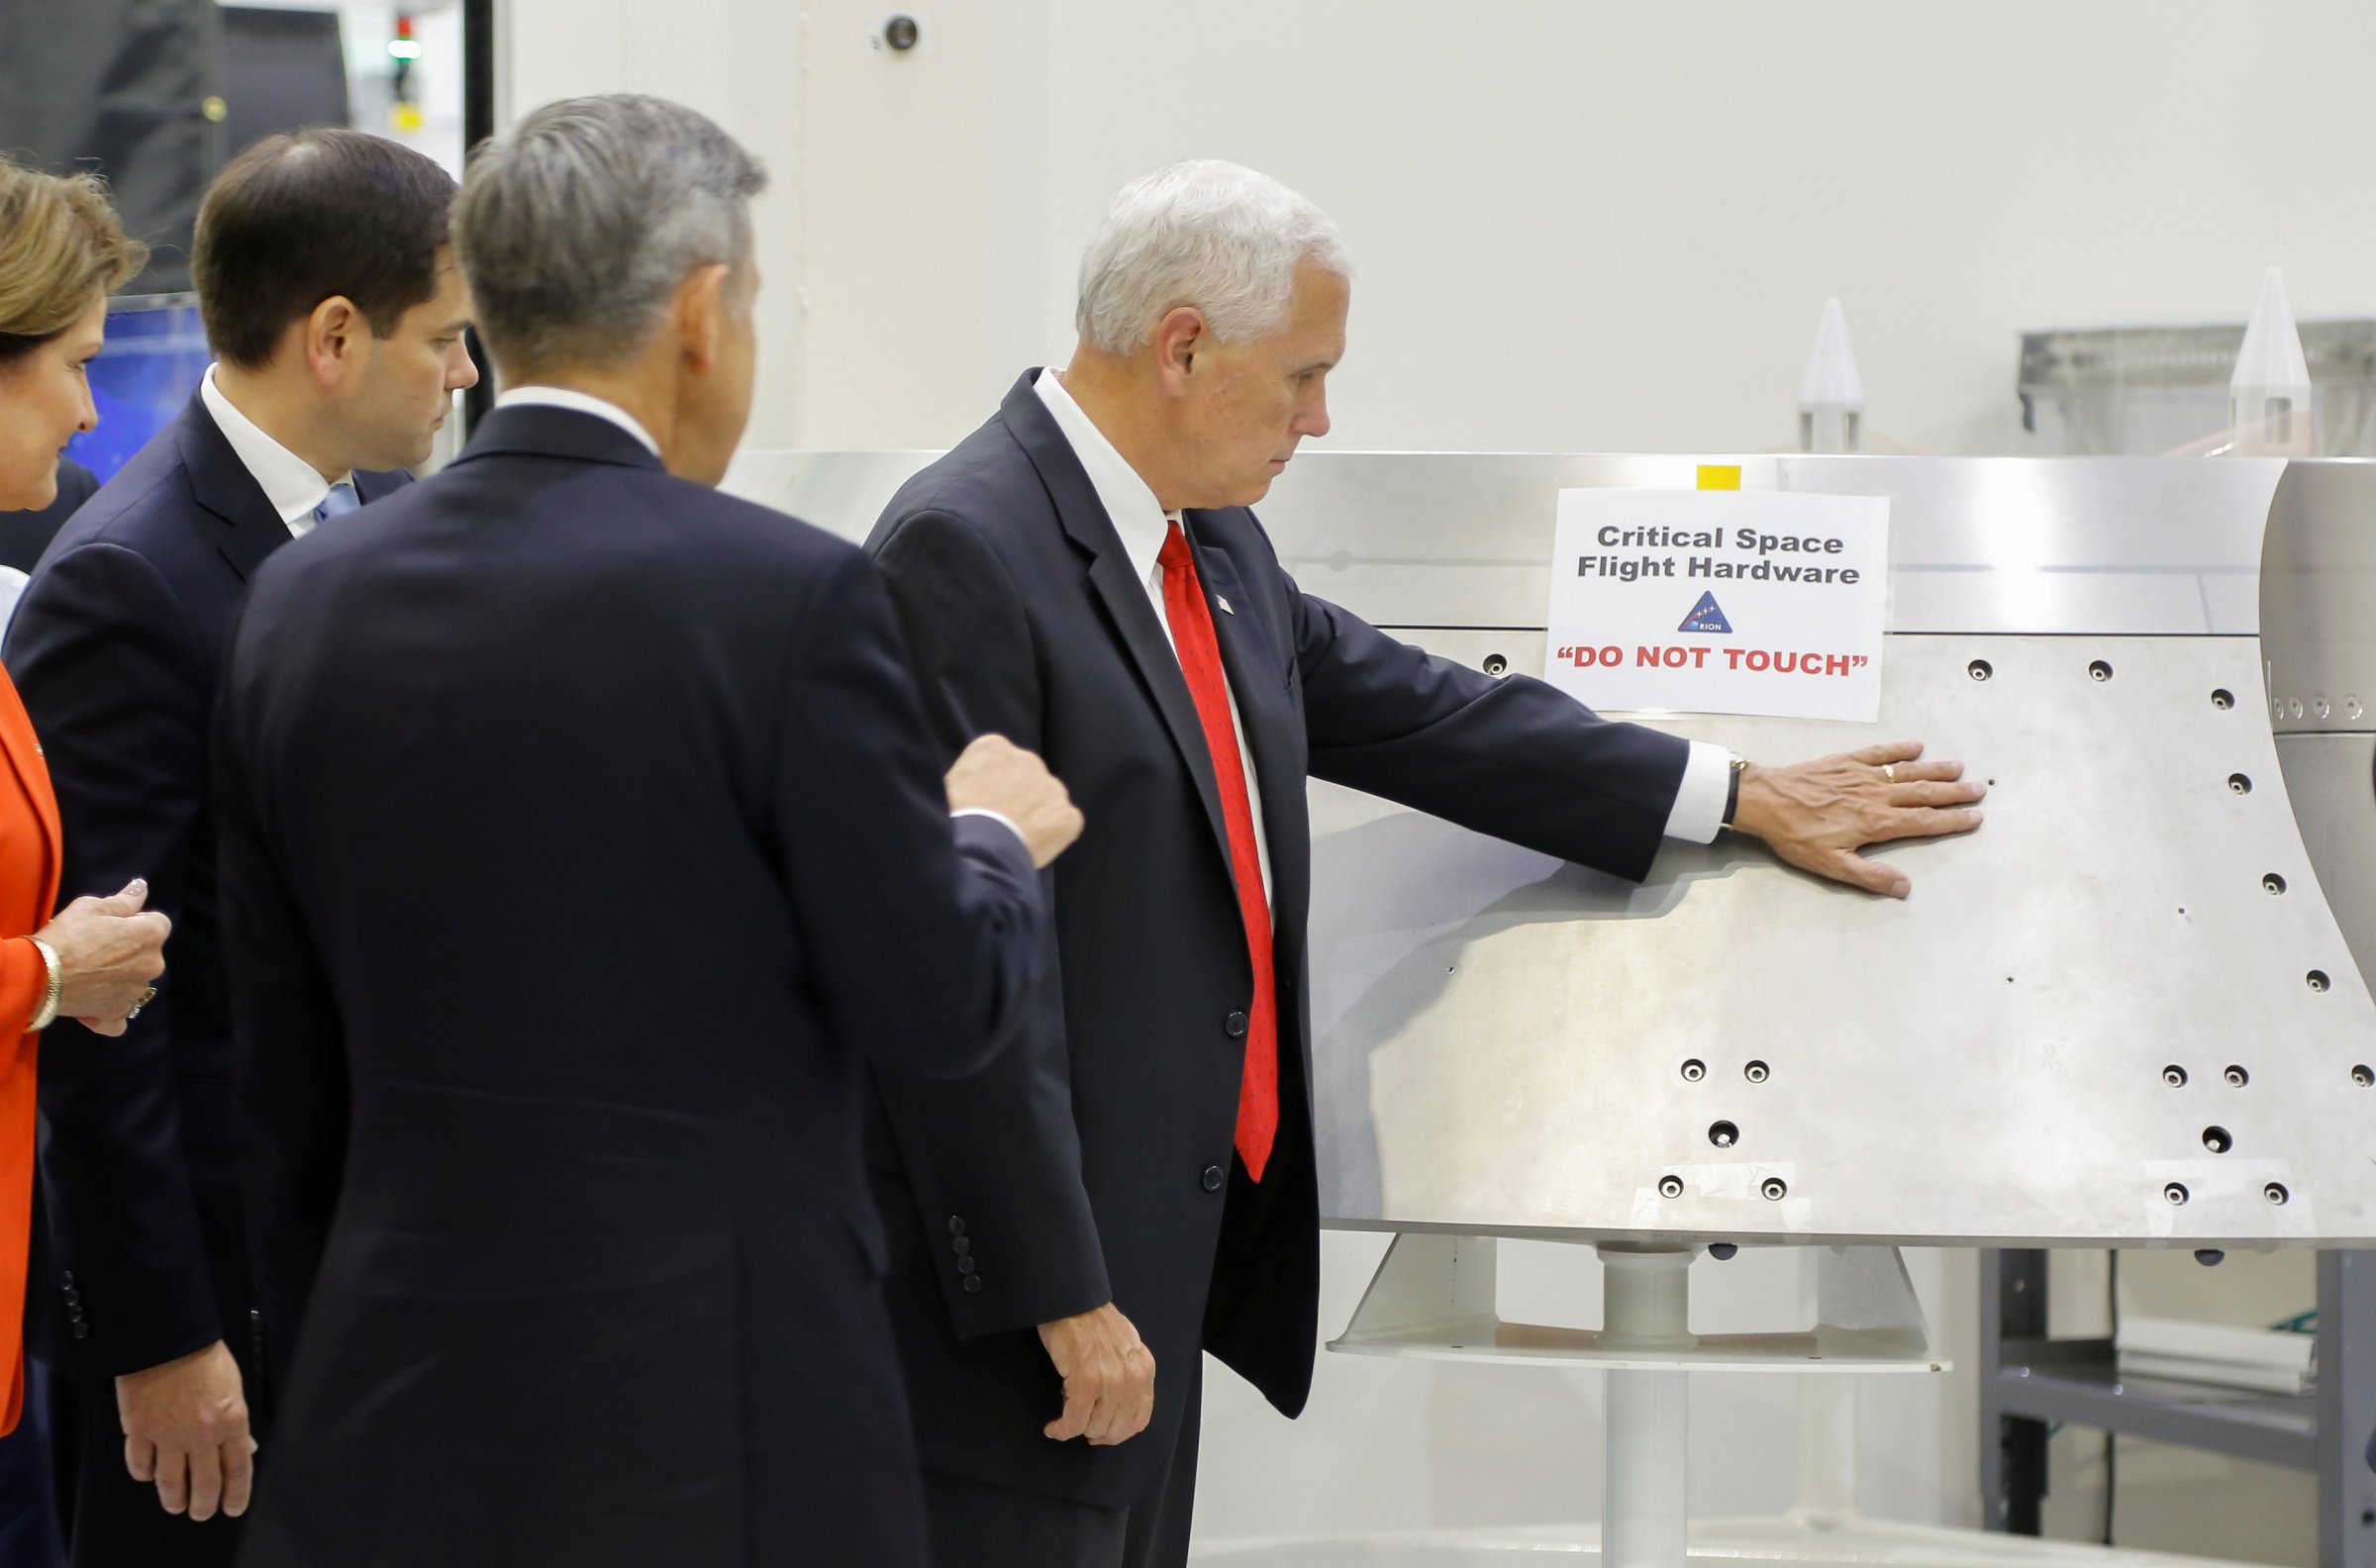 Vice President Mike Pence is shown a piece of hardware by Kennedy Space Center Director Robert Cabana during a tour of the Operations and Checkout Building in Florida, July 6, 2017.